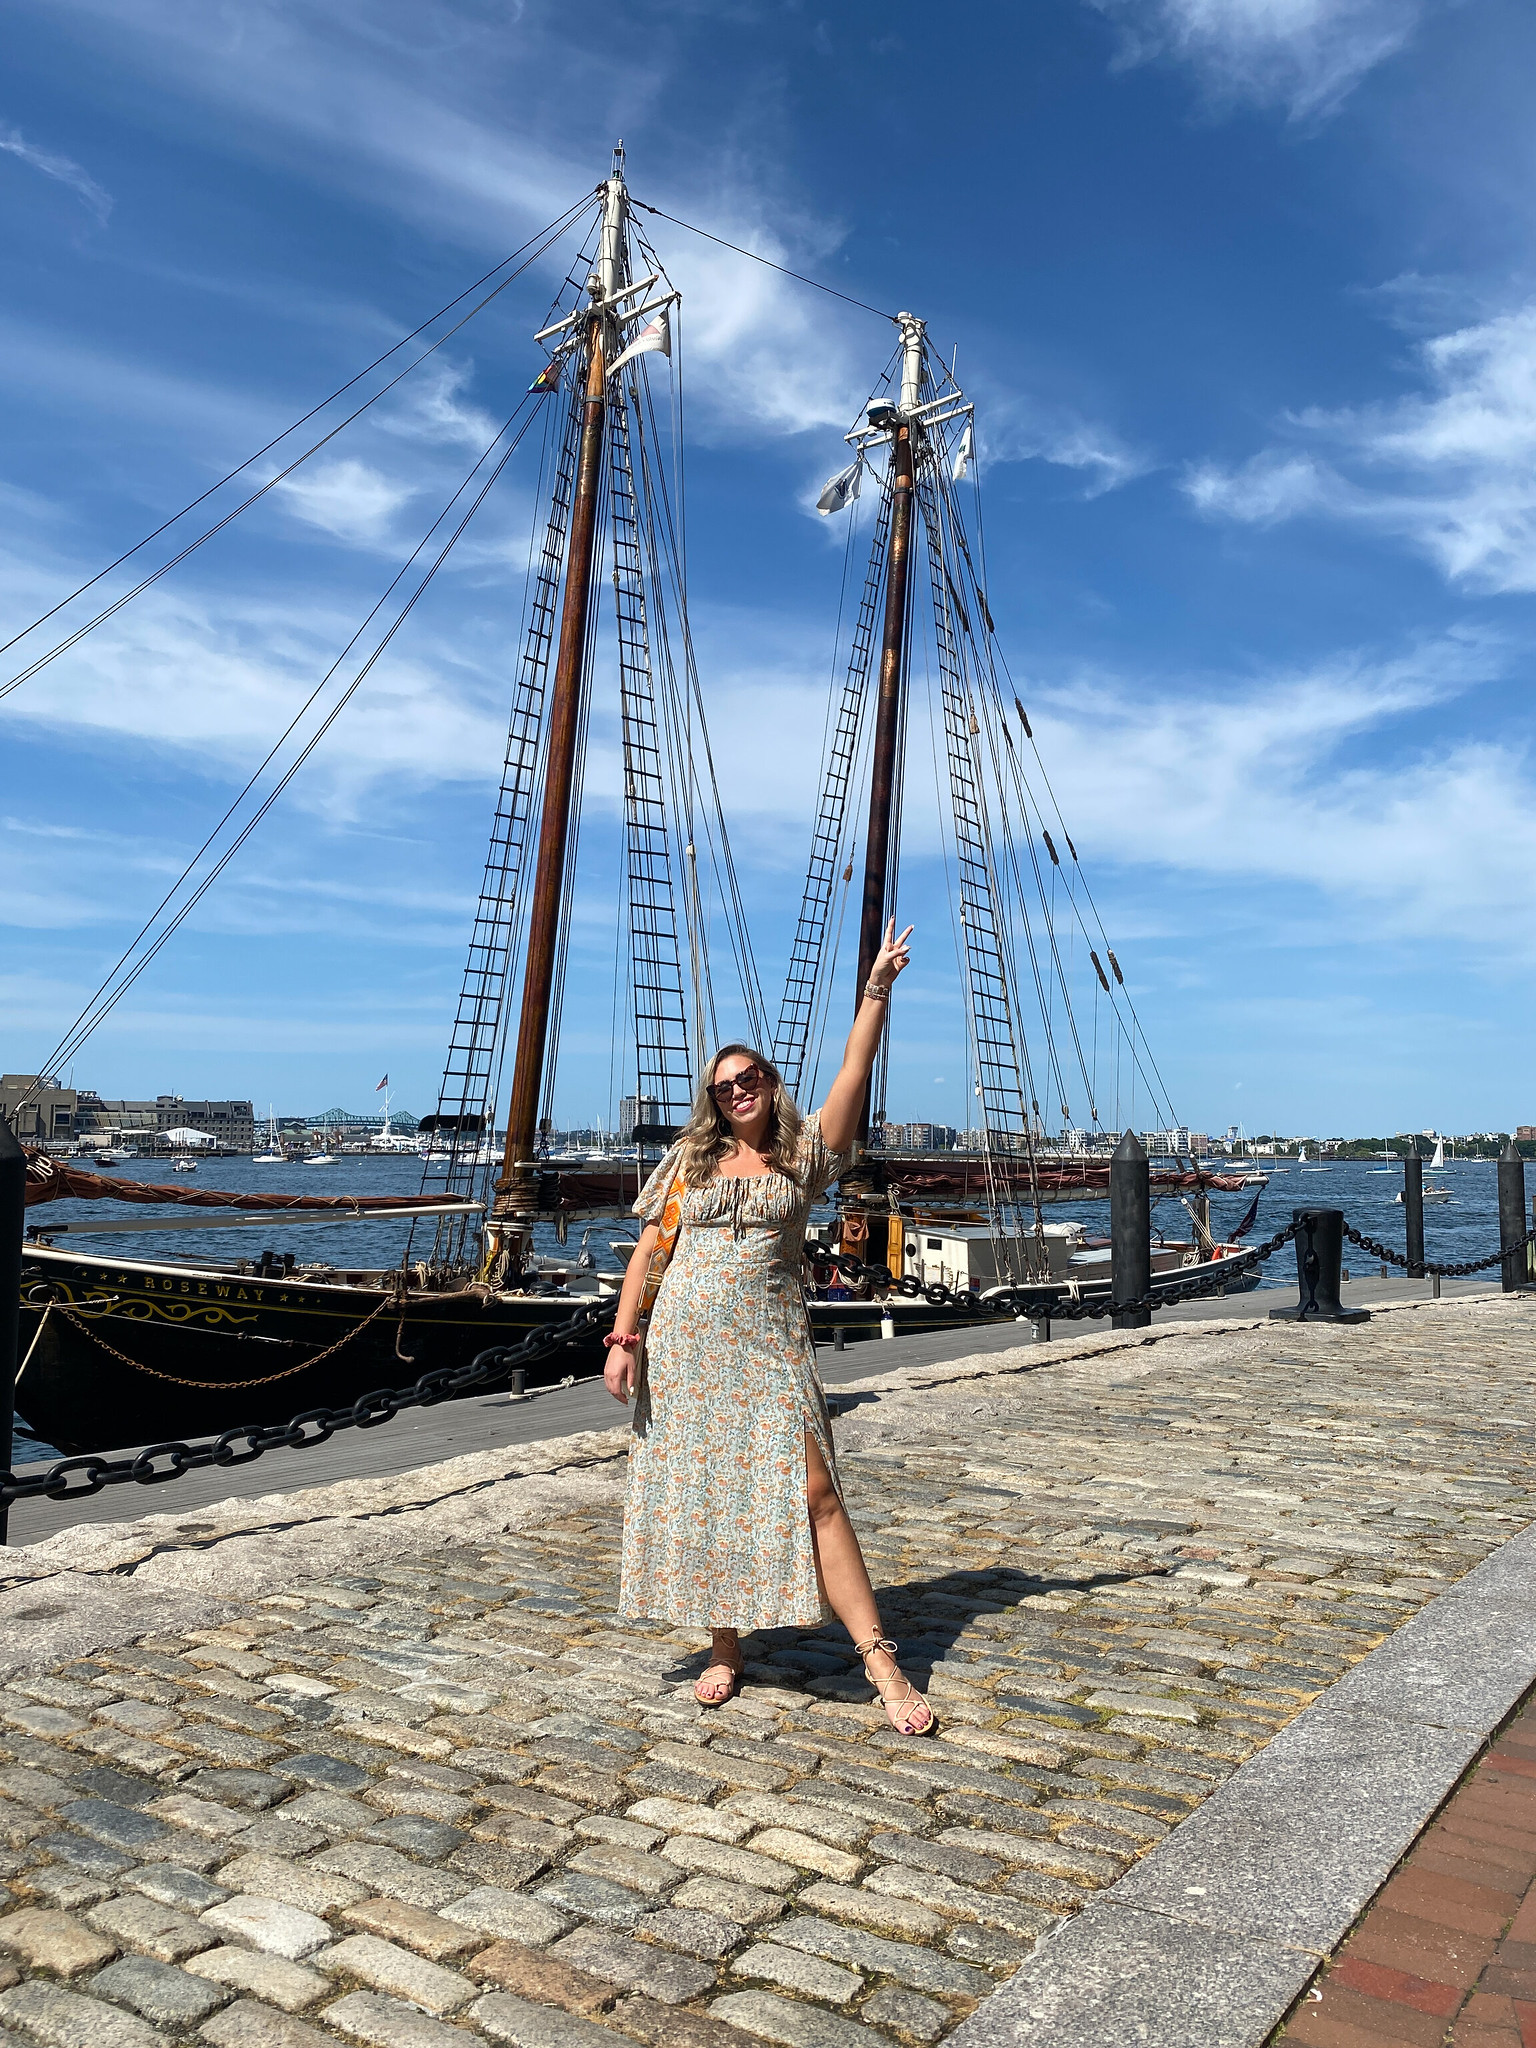 Boston Seaport | Harborwalk | What to See in Boston | 2 Days in Boston | 48 Hours in Boston | The Perfect Weekend Itinerary | Best Things to Do in Boston | Explore Boston, MA | Weekend in Boston, Massachusetts | Boston Travel Guide | Top Things to do in Boston